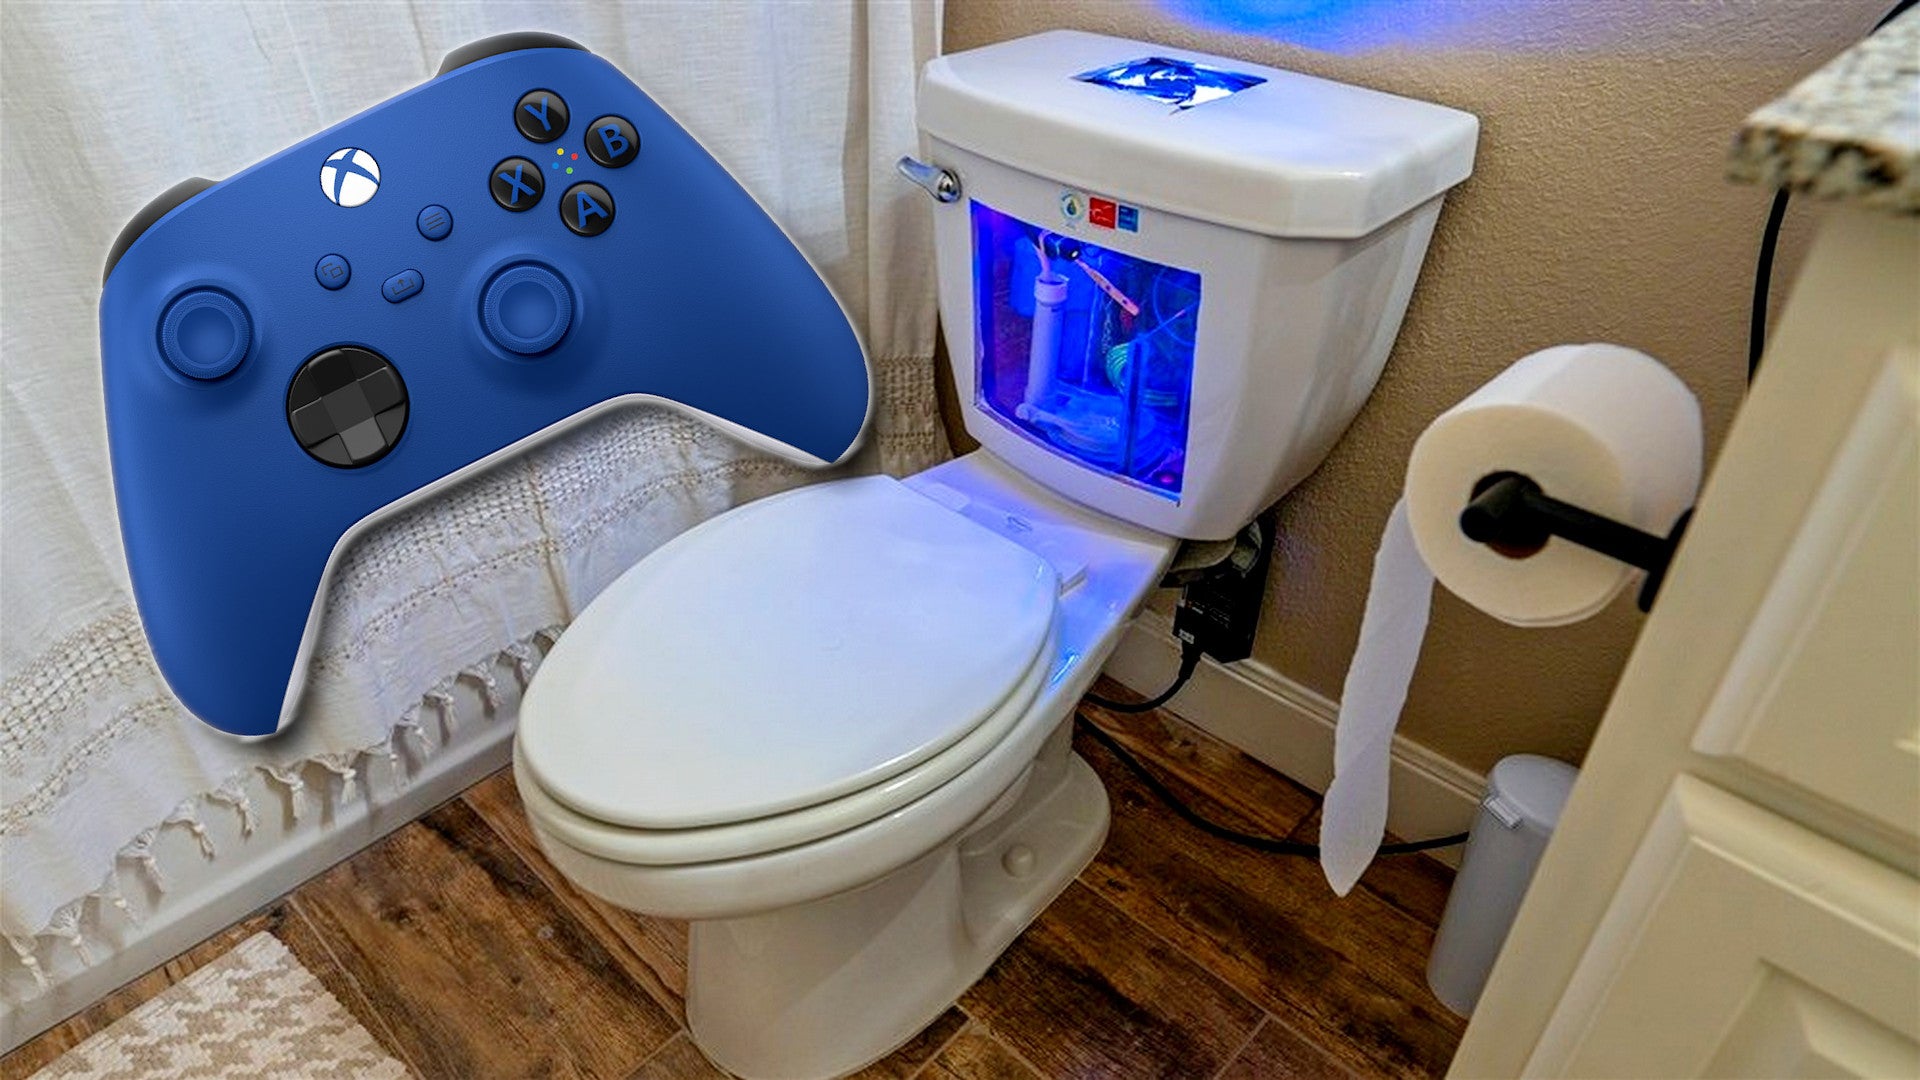 YouTuber installs a gaming computer in the toilet